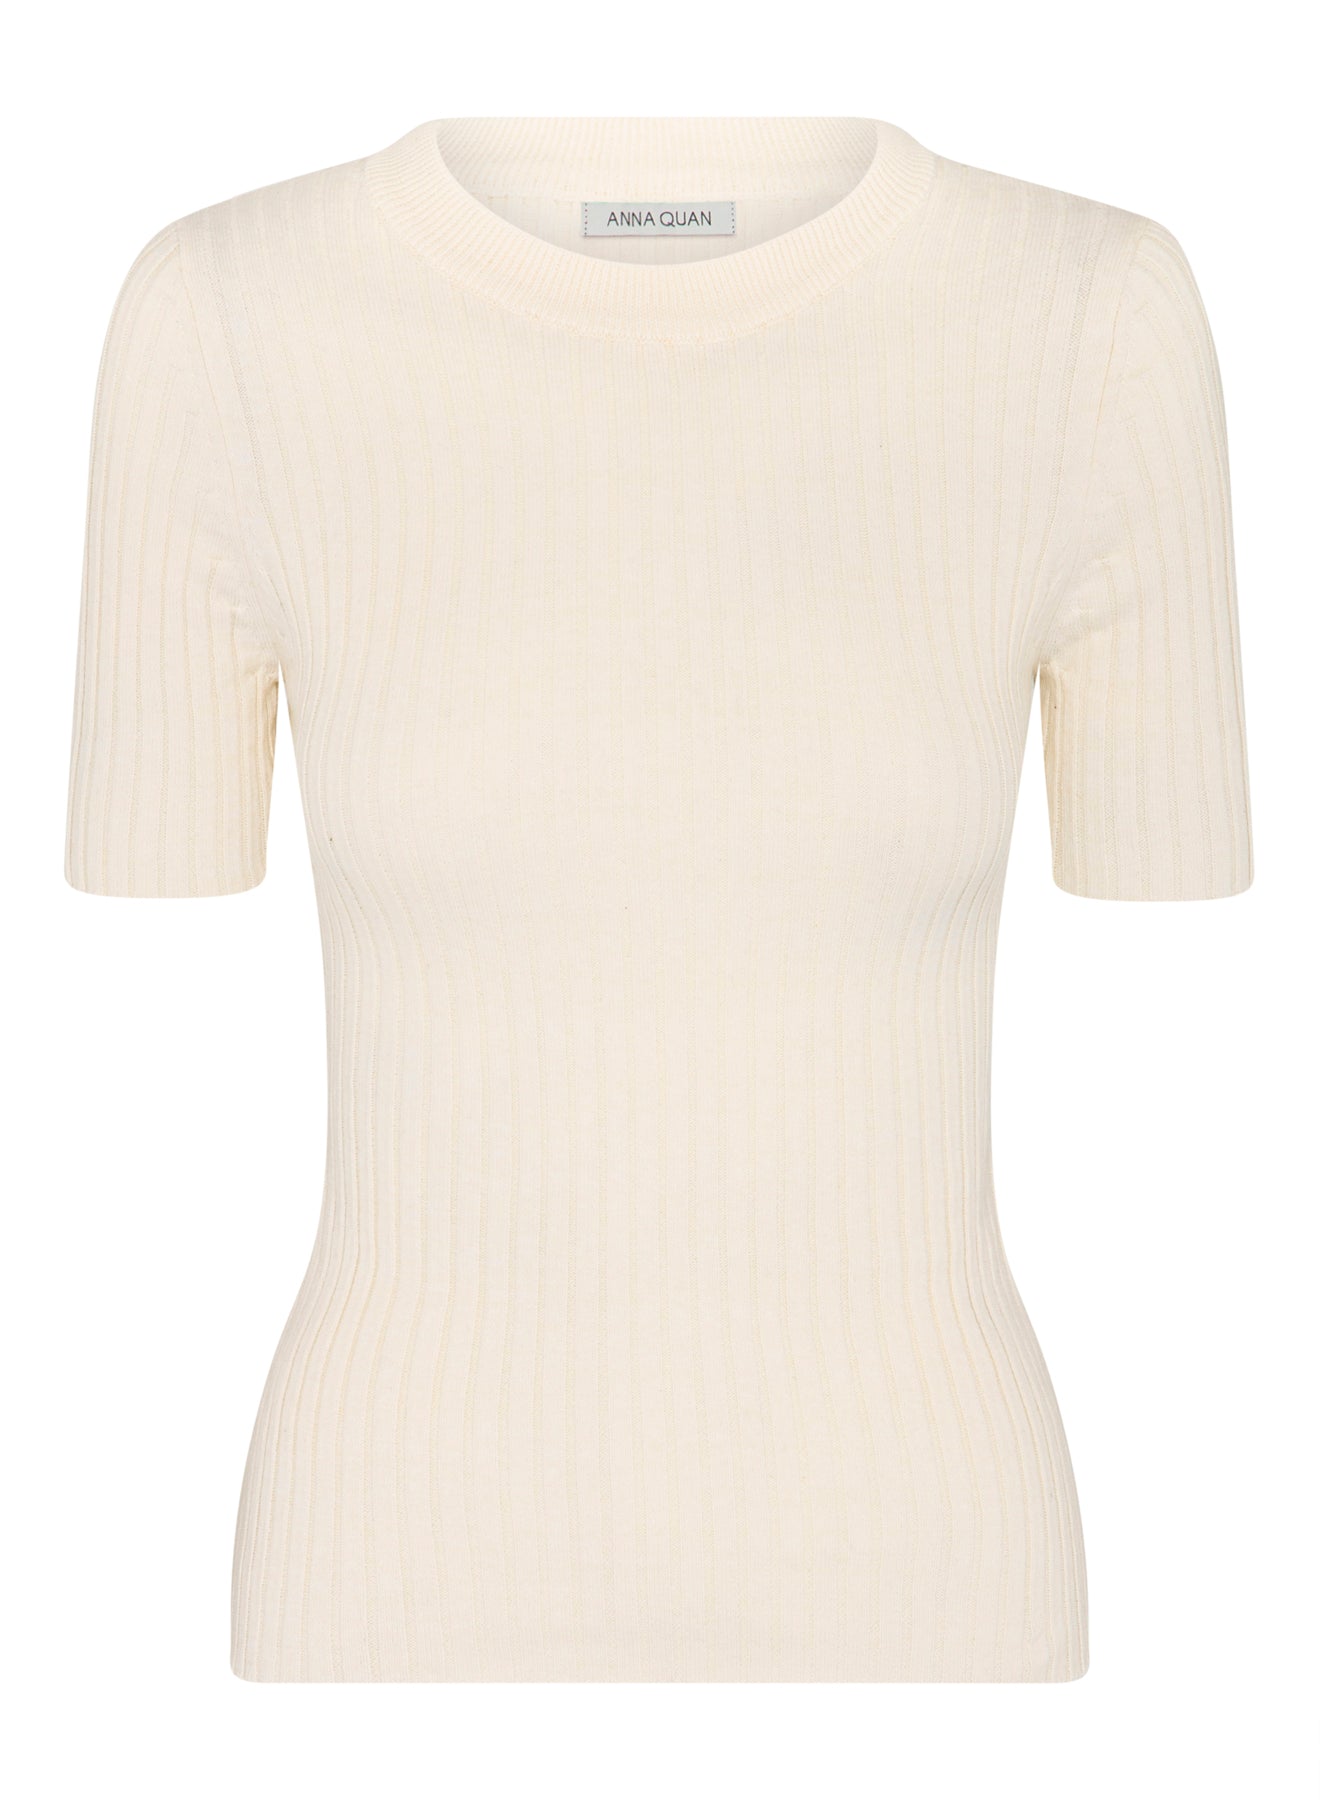 ANNA QUAN cotton rib knit crew neck top with marl texture. Short sleeve knit top, short sleeve top, short sleeve tee, every day knit tee, every day work knit top.